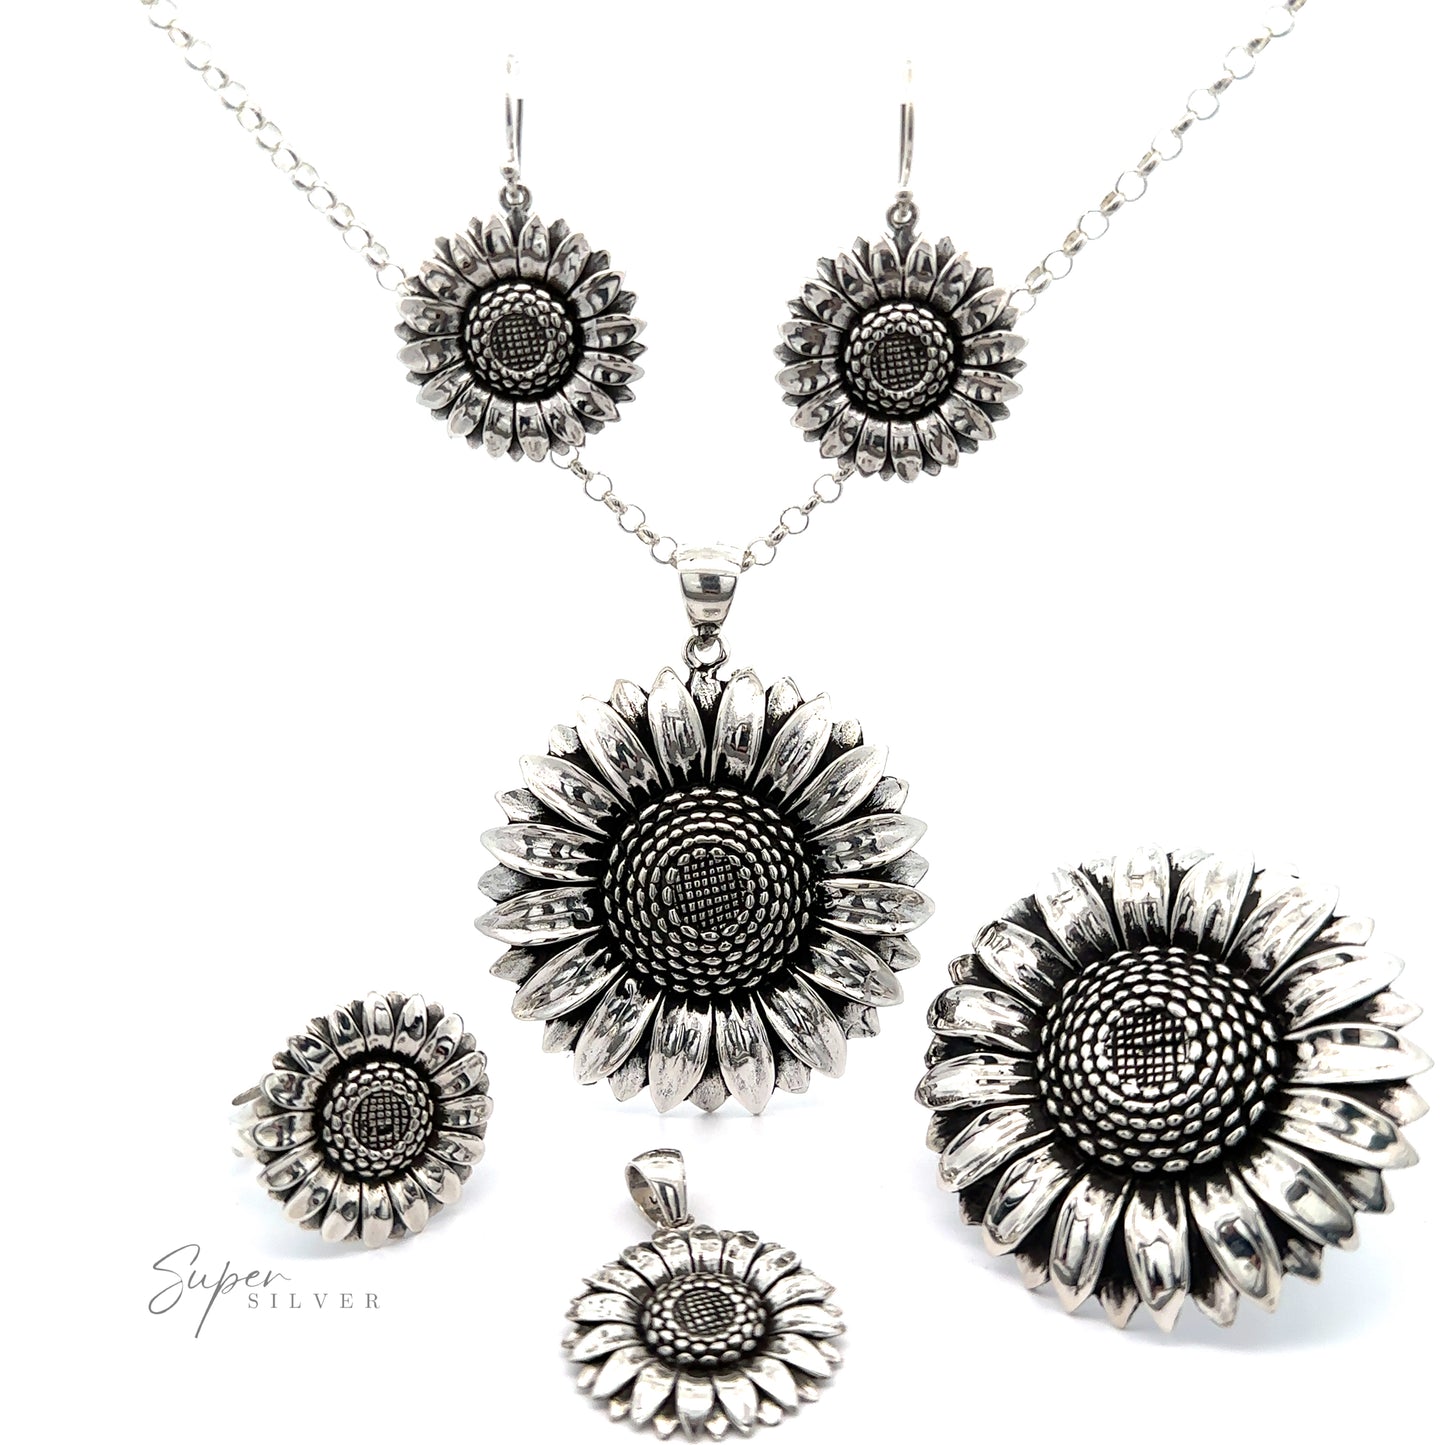 Silver sunflower-themed jewelry set including a necklace, earrings, and Silver Sunflower Pendants displayed on a white background.